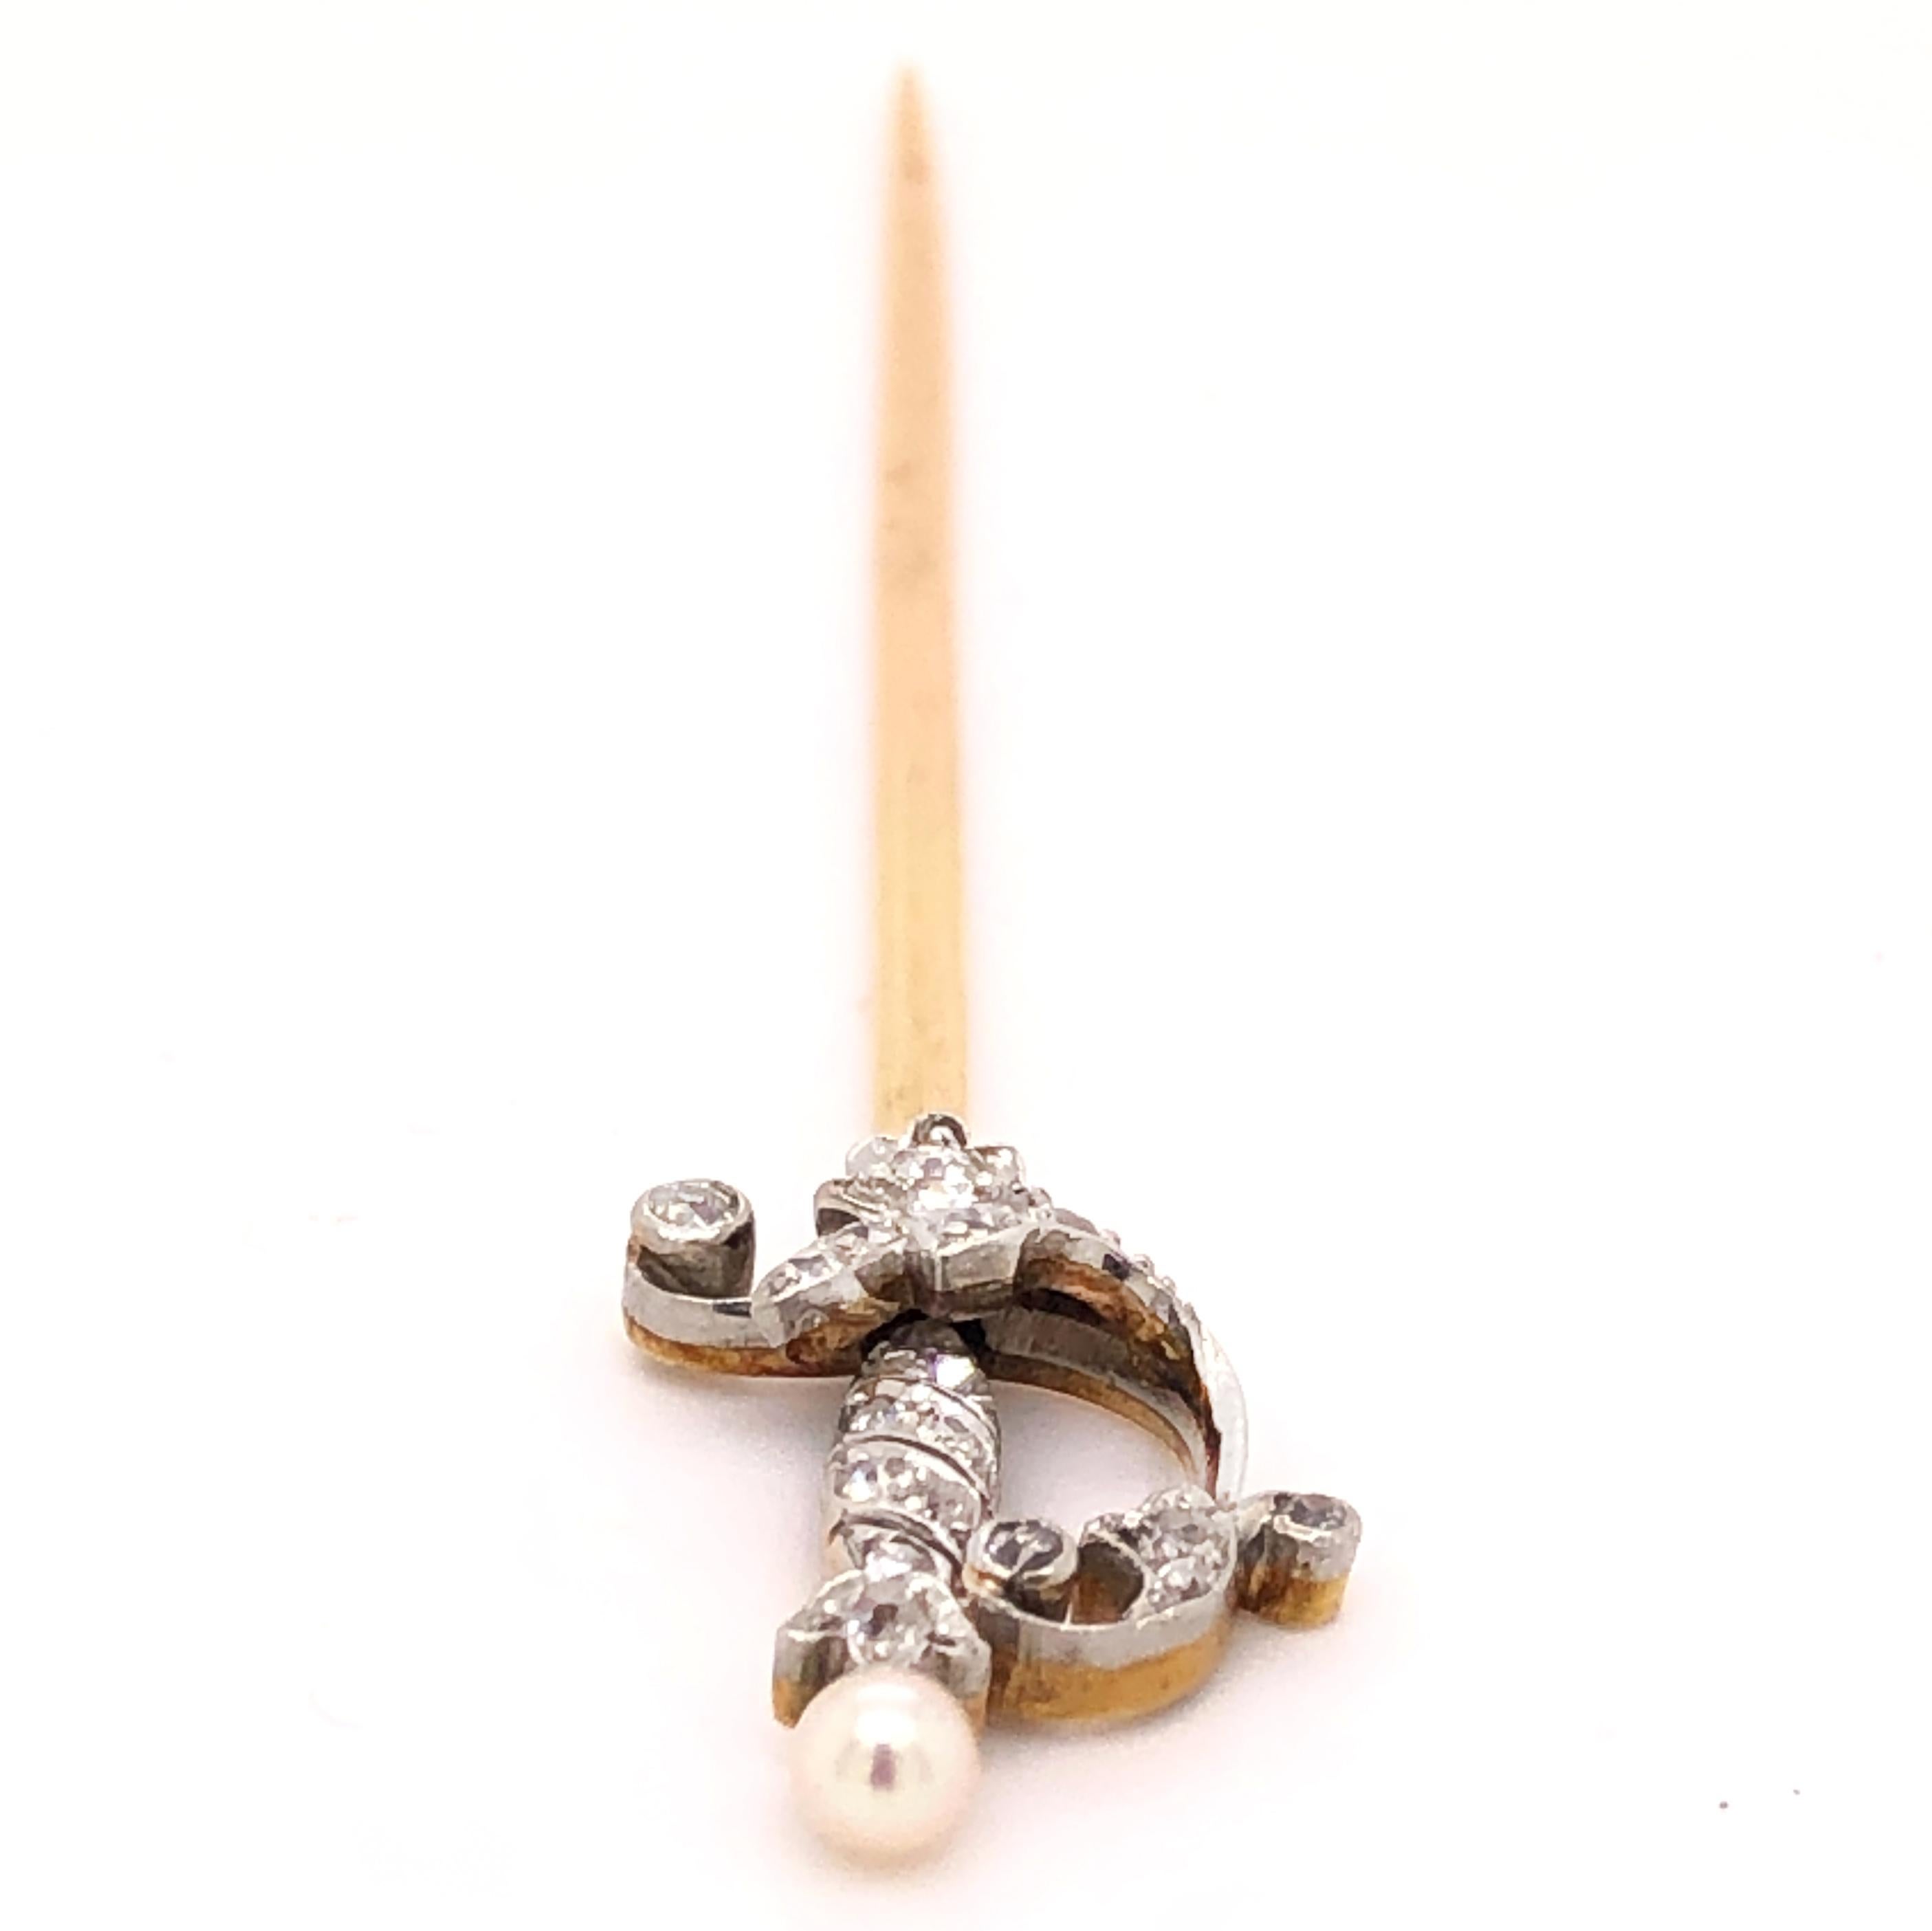 A finely made pearl and diamond dagger in yellow gold and silver. This piece can be used as a tie or hat pin and beautifully accentuates the outfit.